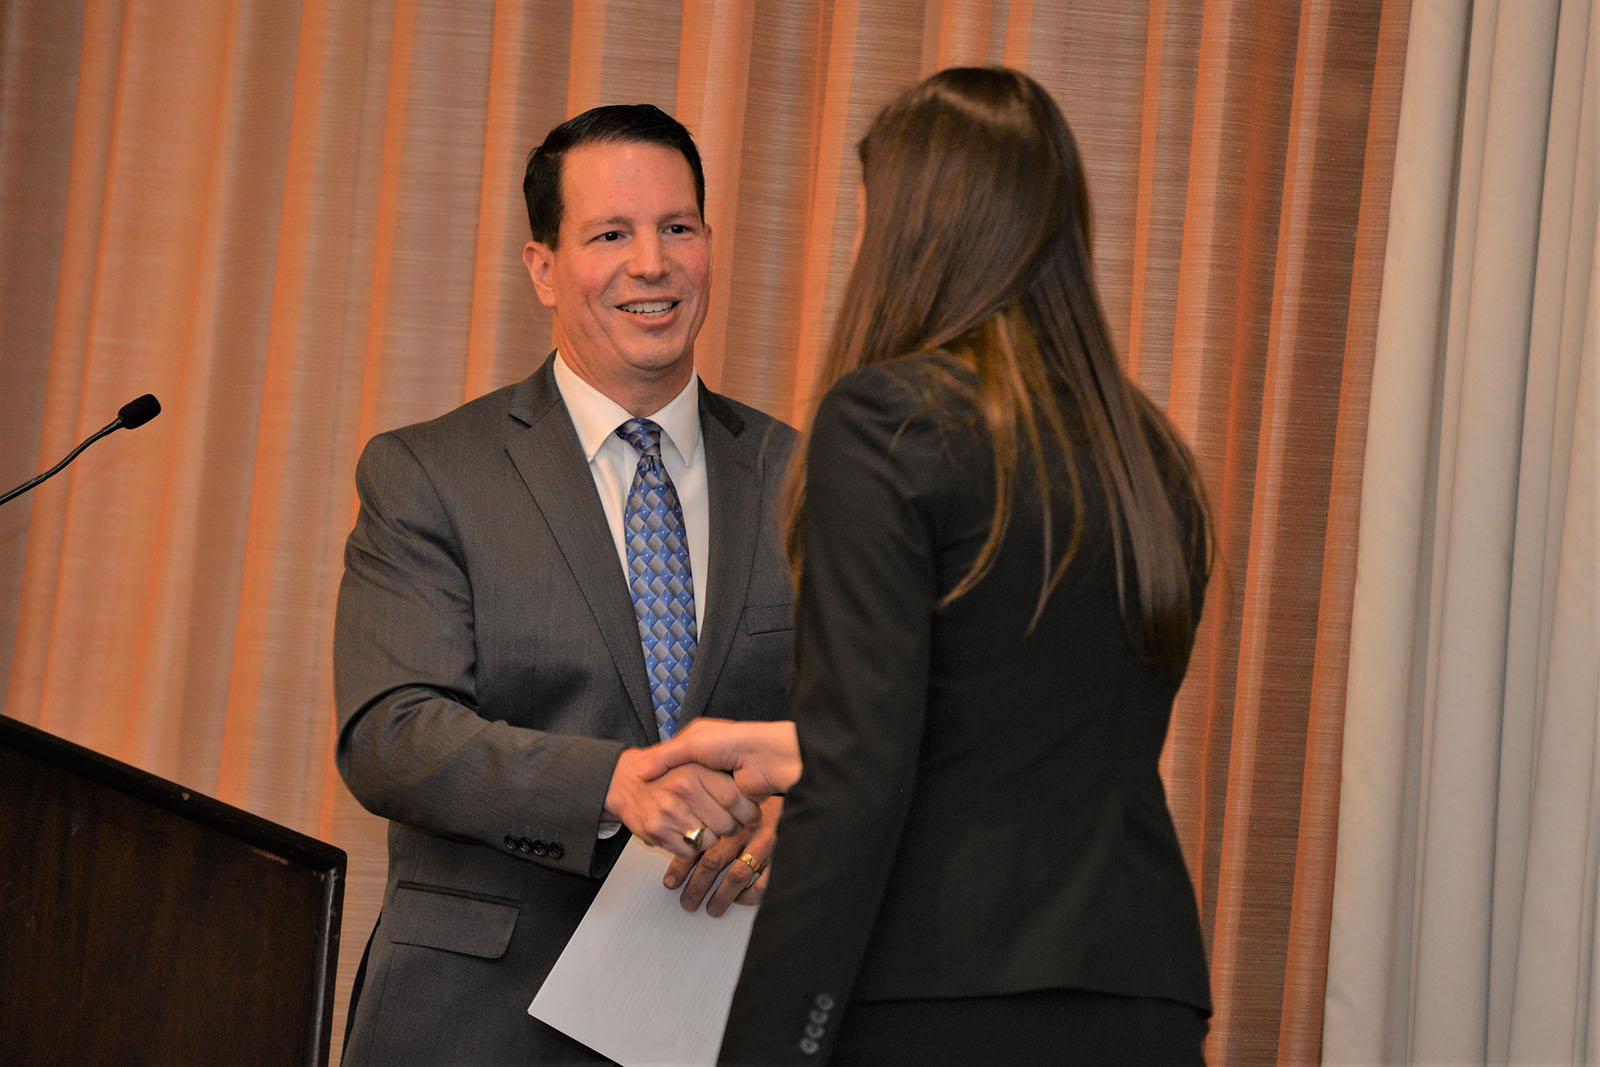 Marketing Associate Professor Rich Rocco hands award to student at Beta Gamma Sigma induction dinner and ceremony